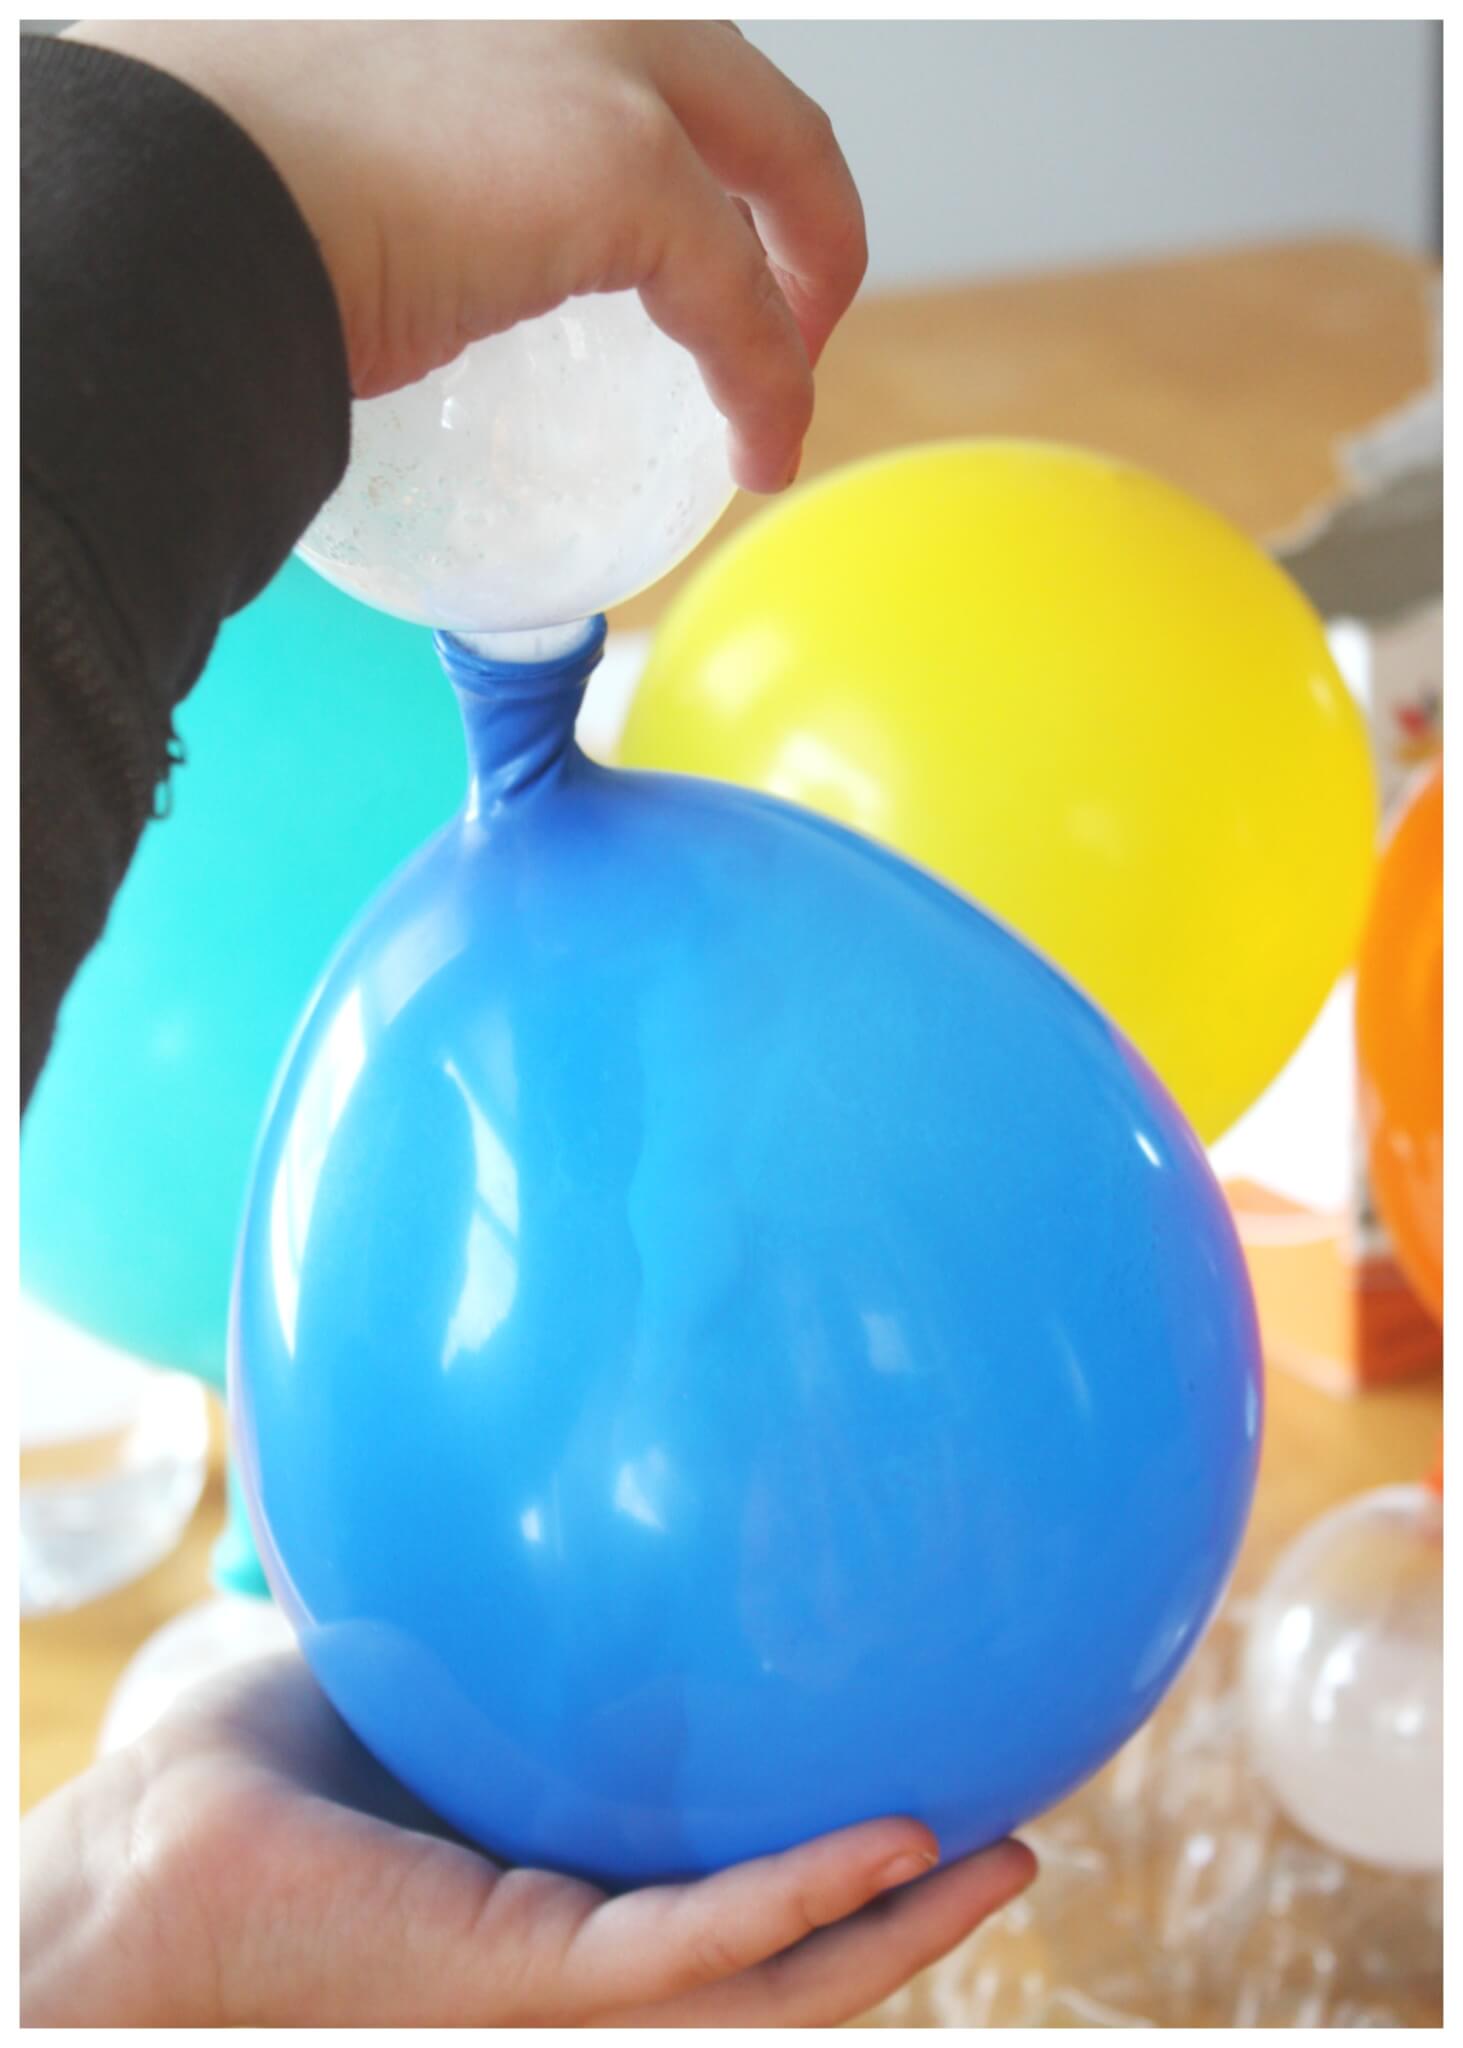 Can sixth graders make self-inflating balloons as a science project?